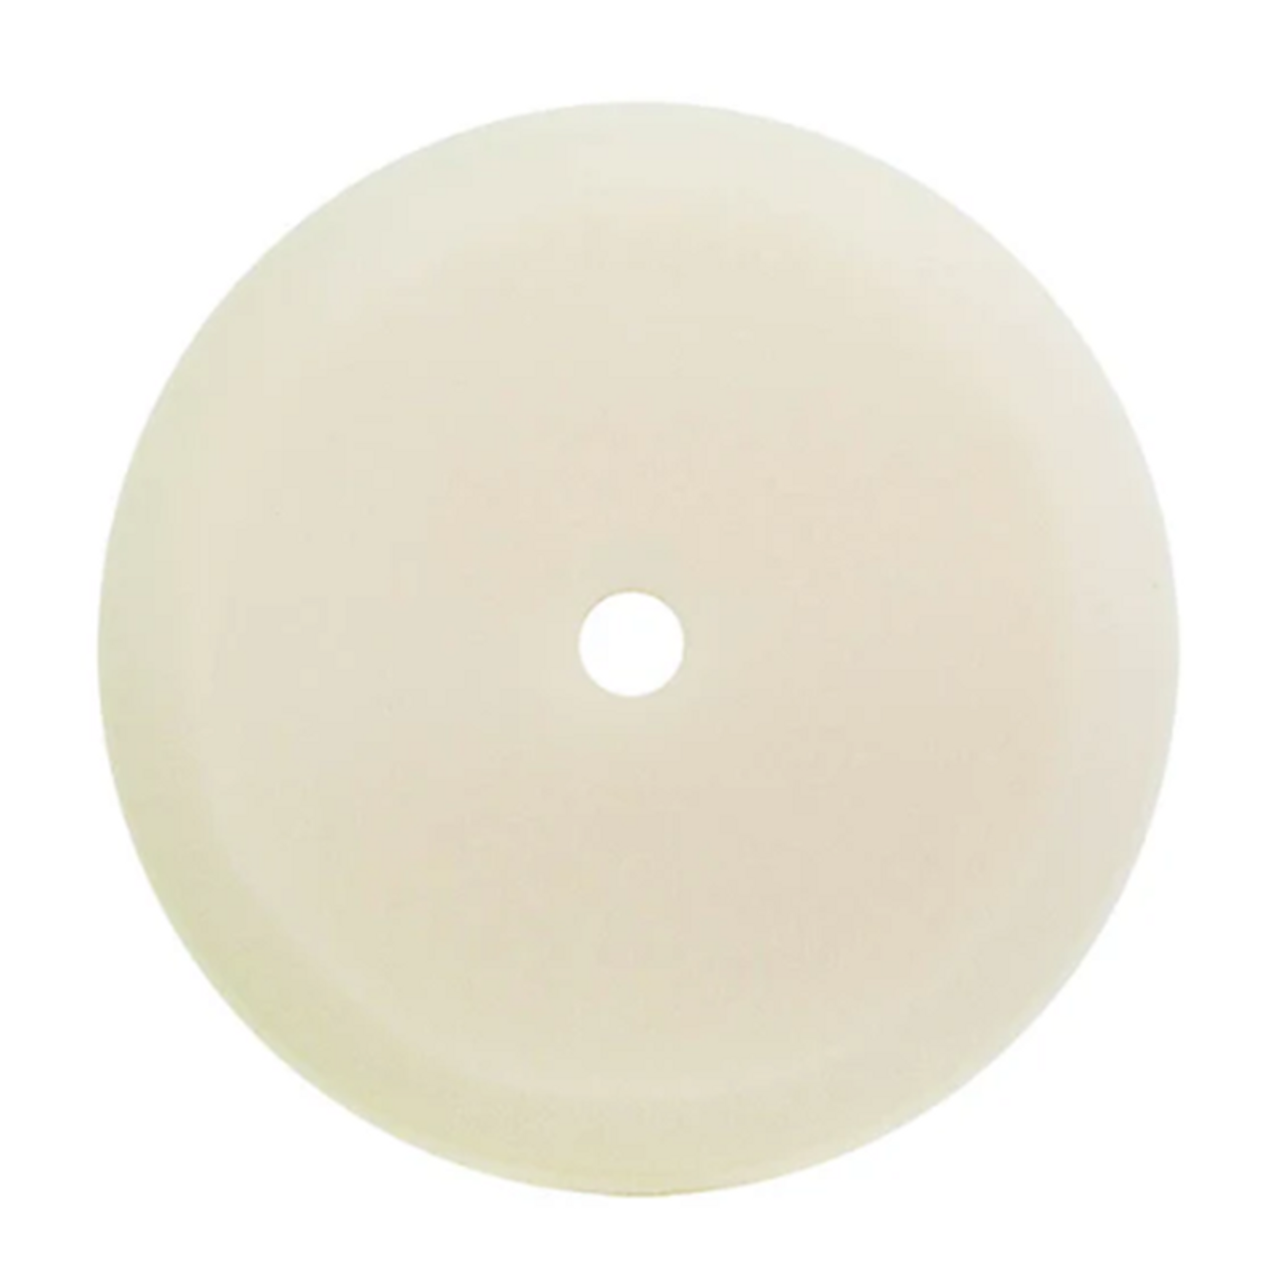 9" US White Ultra Finishing Foam Grip Pad™ with Center Tee, Contour Edge